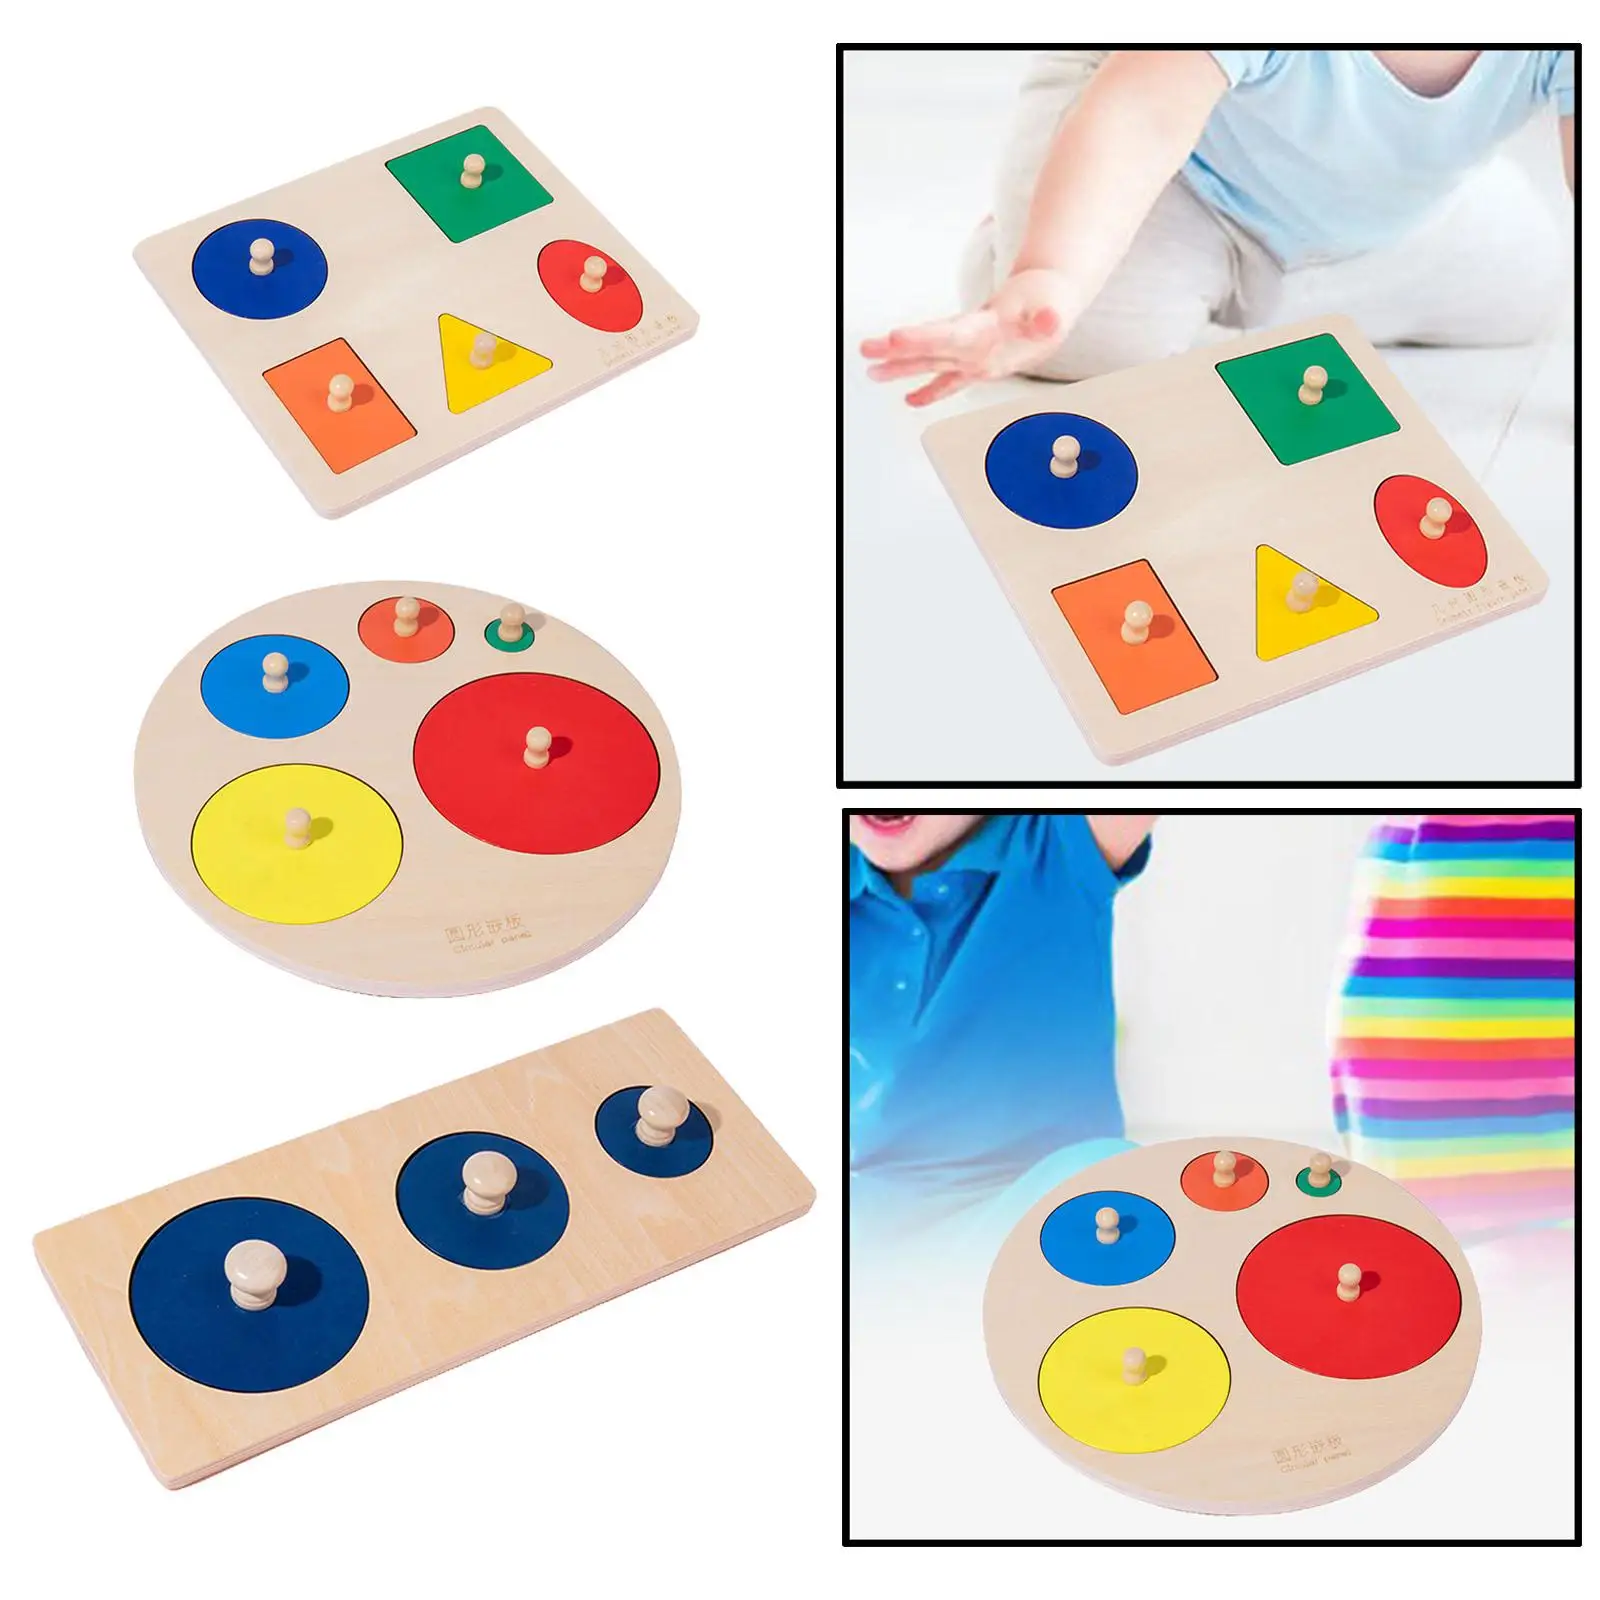 Wood Knob Puzzle Peg Board Sensory Toy Montessori Shape Puzzles Memory Games Early Learning Grasp Board for Game Teaching Indoor